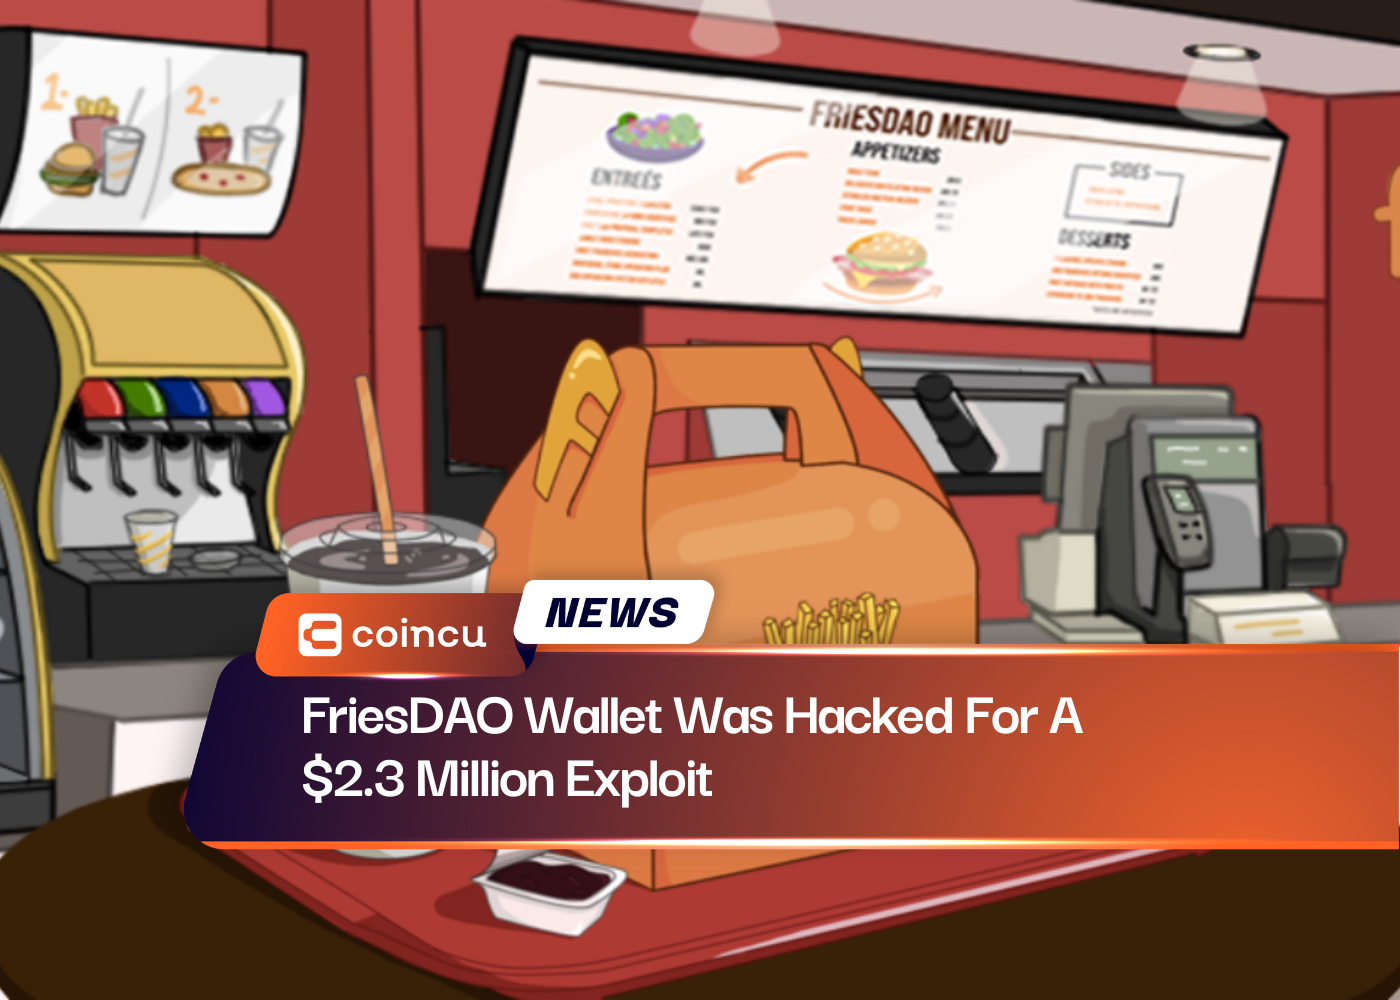 FriesDAO Wallet Was Hacked For A $2.3 Million Exploit